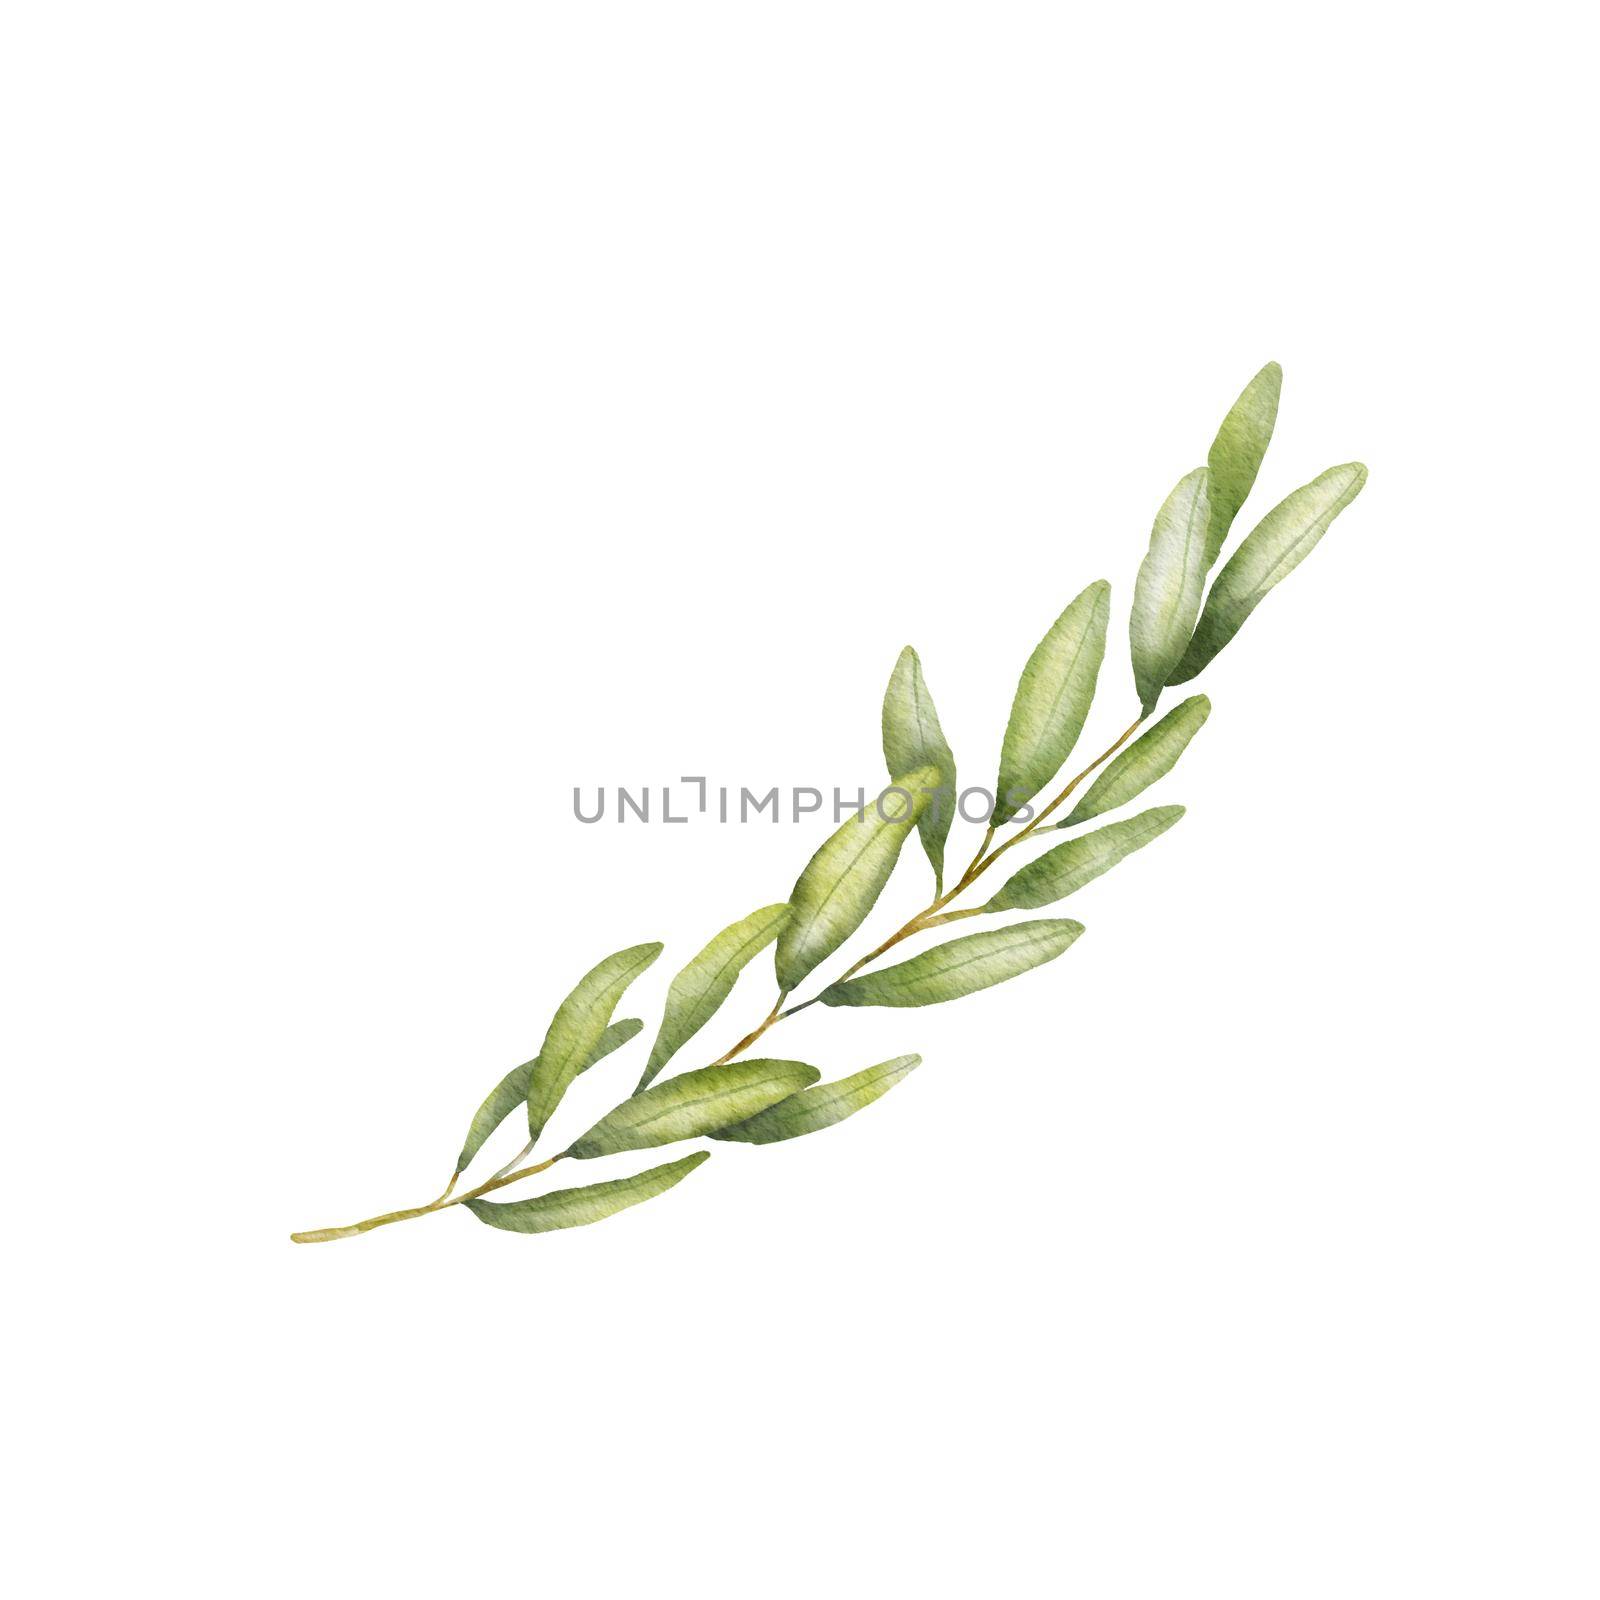 Green olive branch watercolor drawing. Hand drawn illustration with leaves isolated on white.